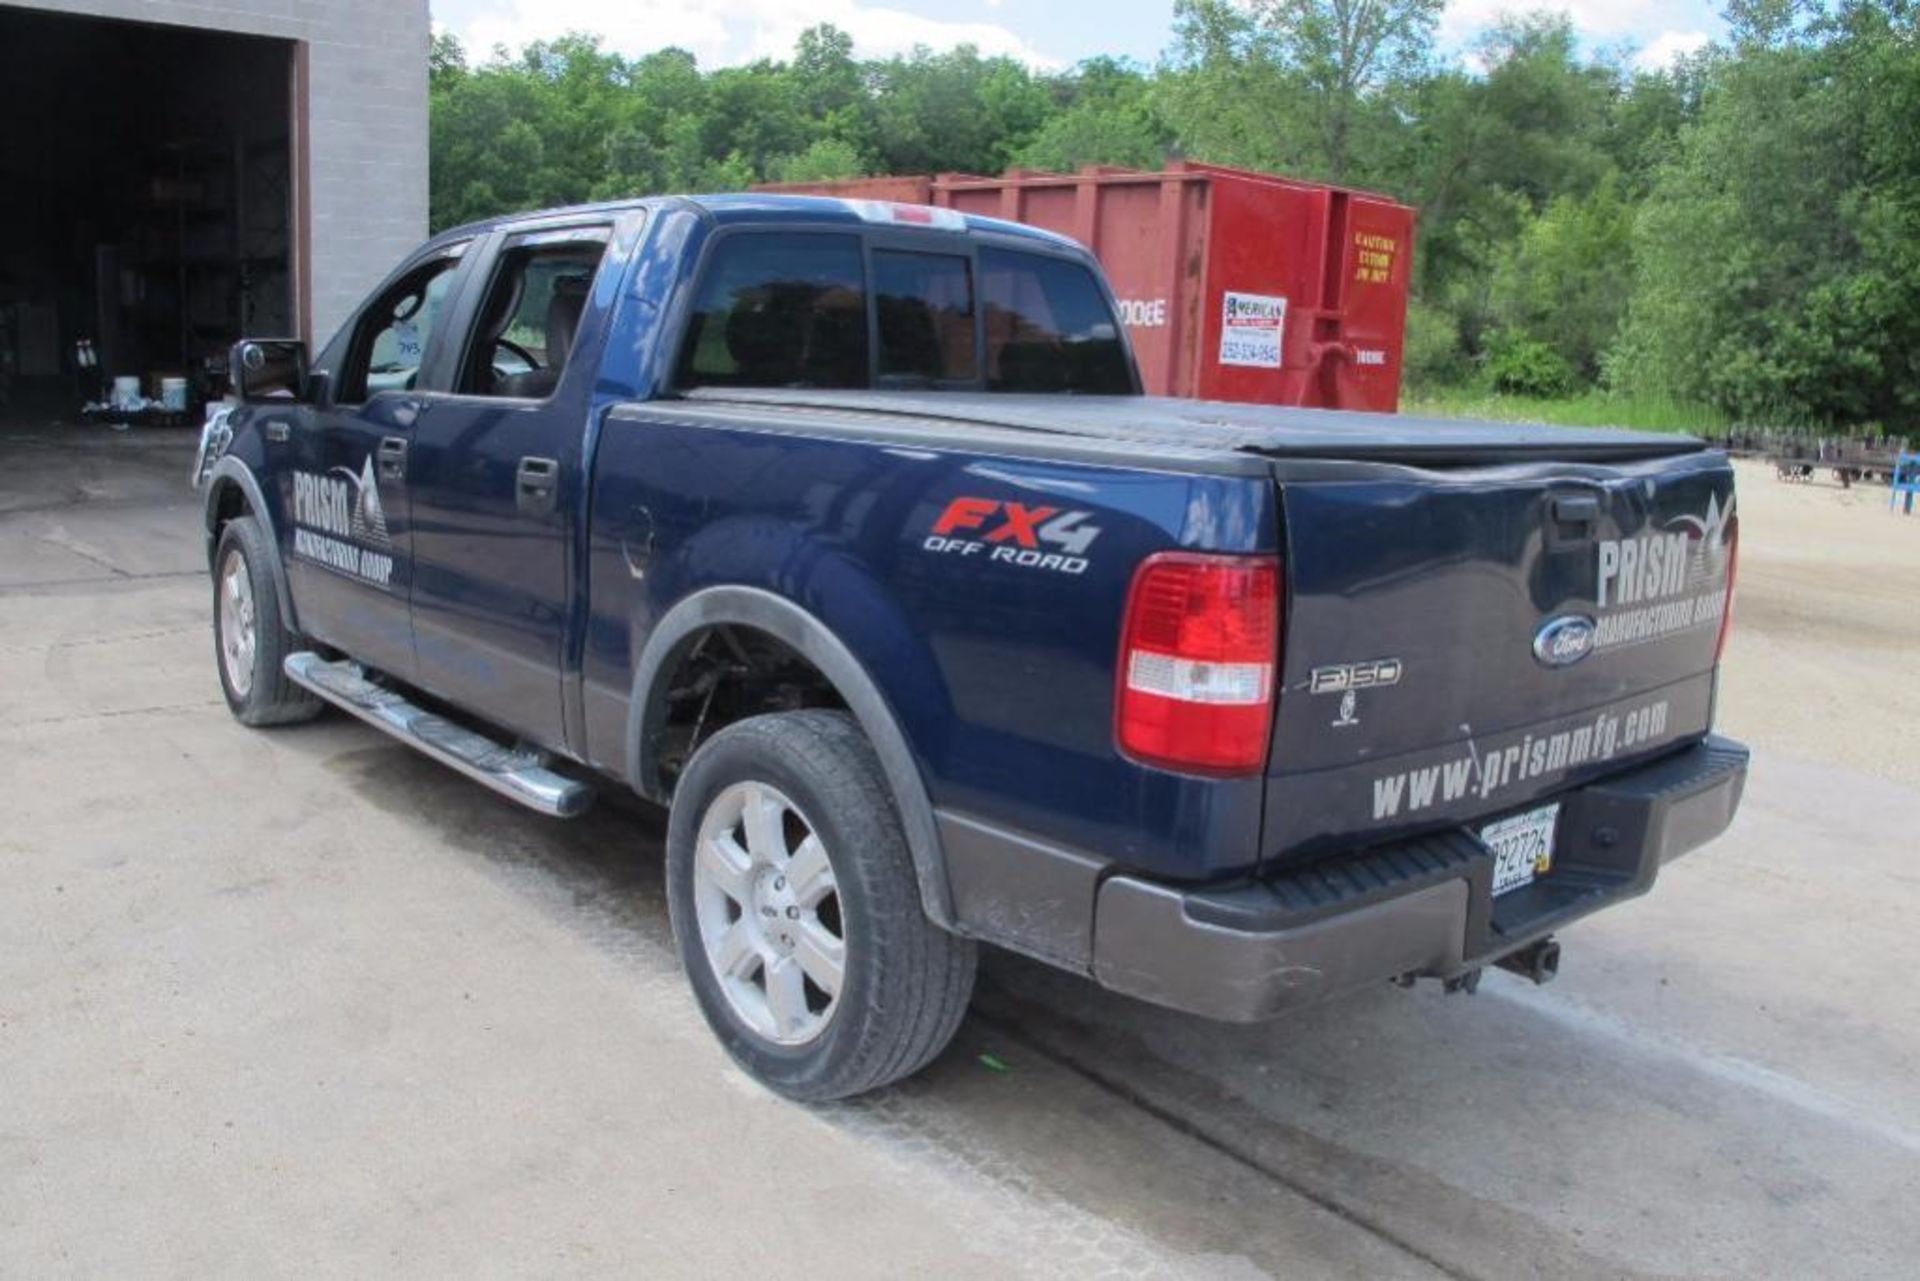 (2007) Ford 4 x 4 Crew Cab Pickup Truck, 5.4 Triton, FX4 Off-road, Short Box with Soft Cover, Brush - Image 3 of 8